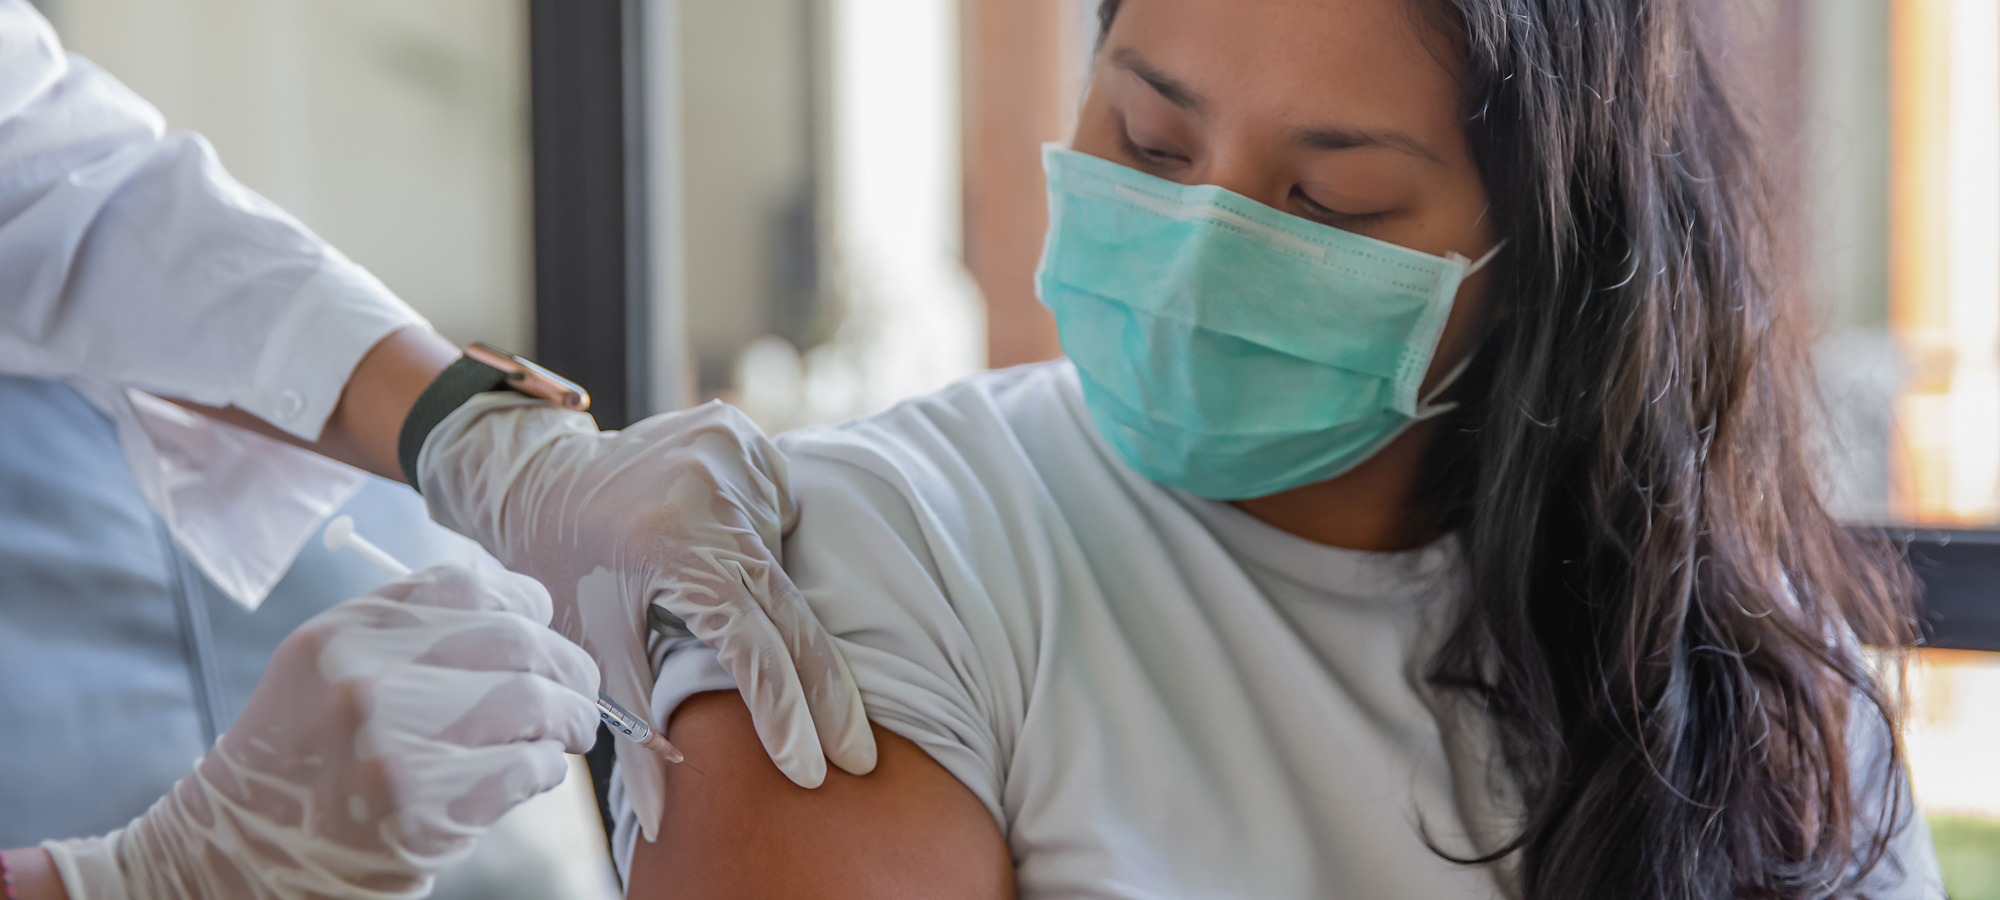 photo - Woman Receiving COVID-19 Vaccine at Home